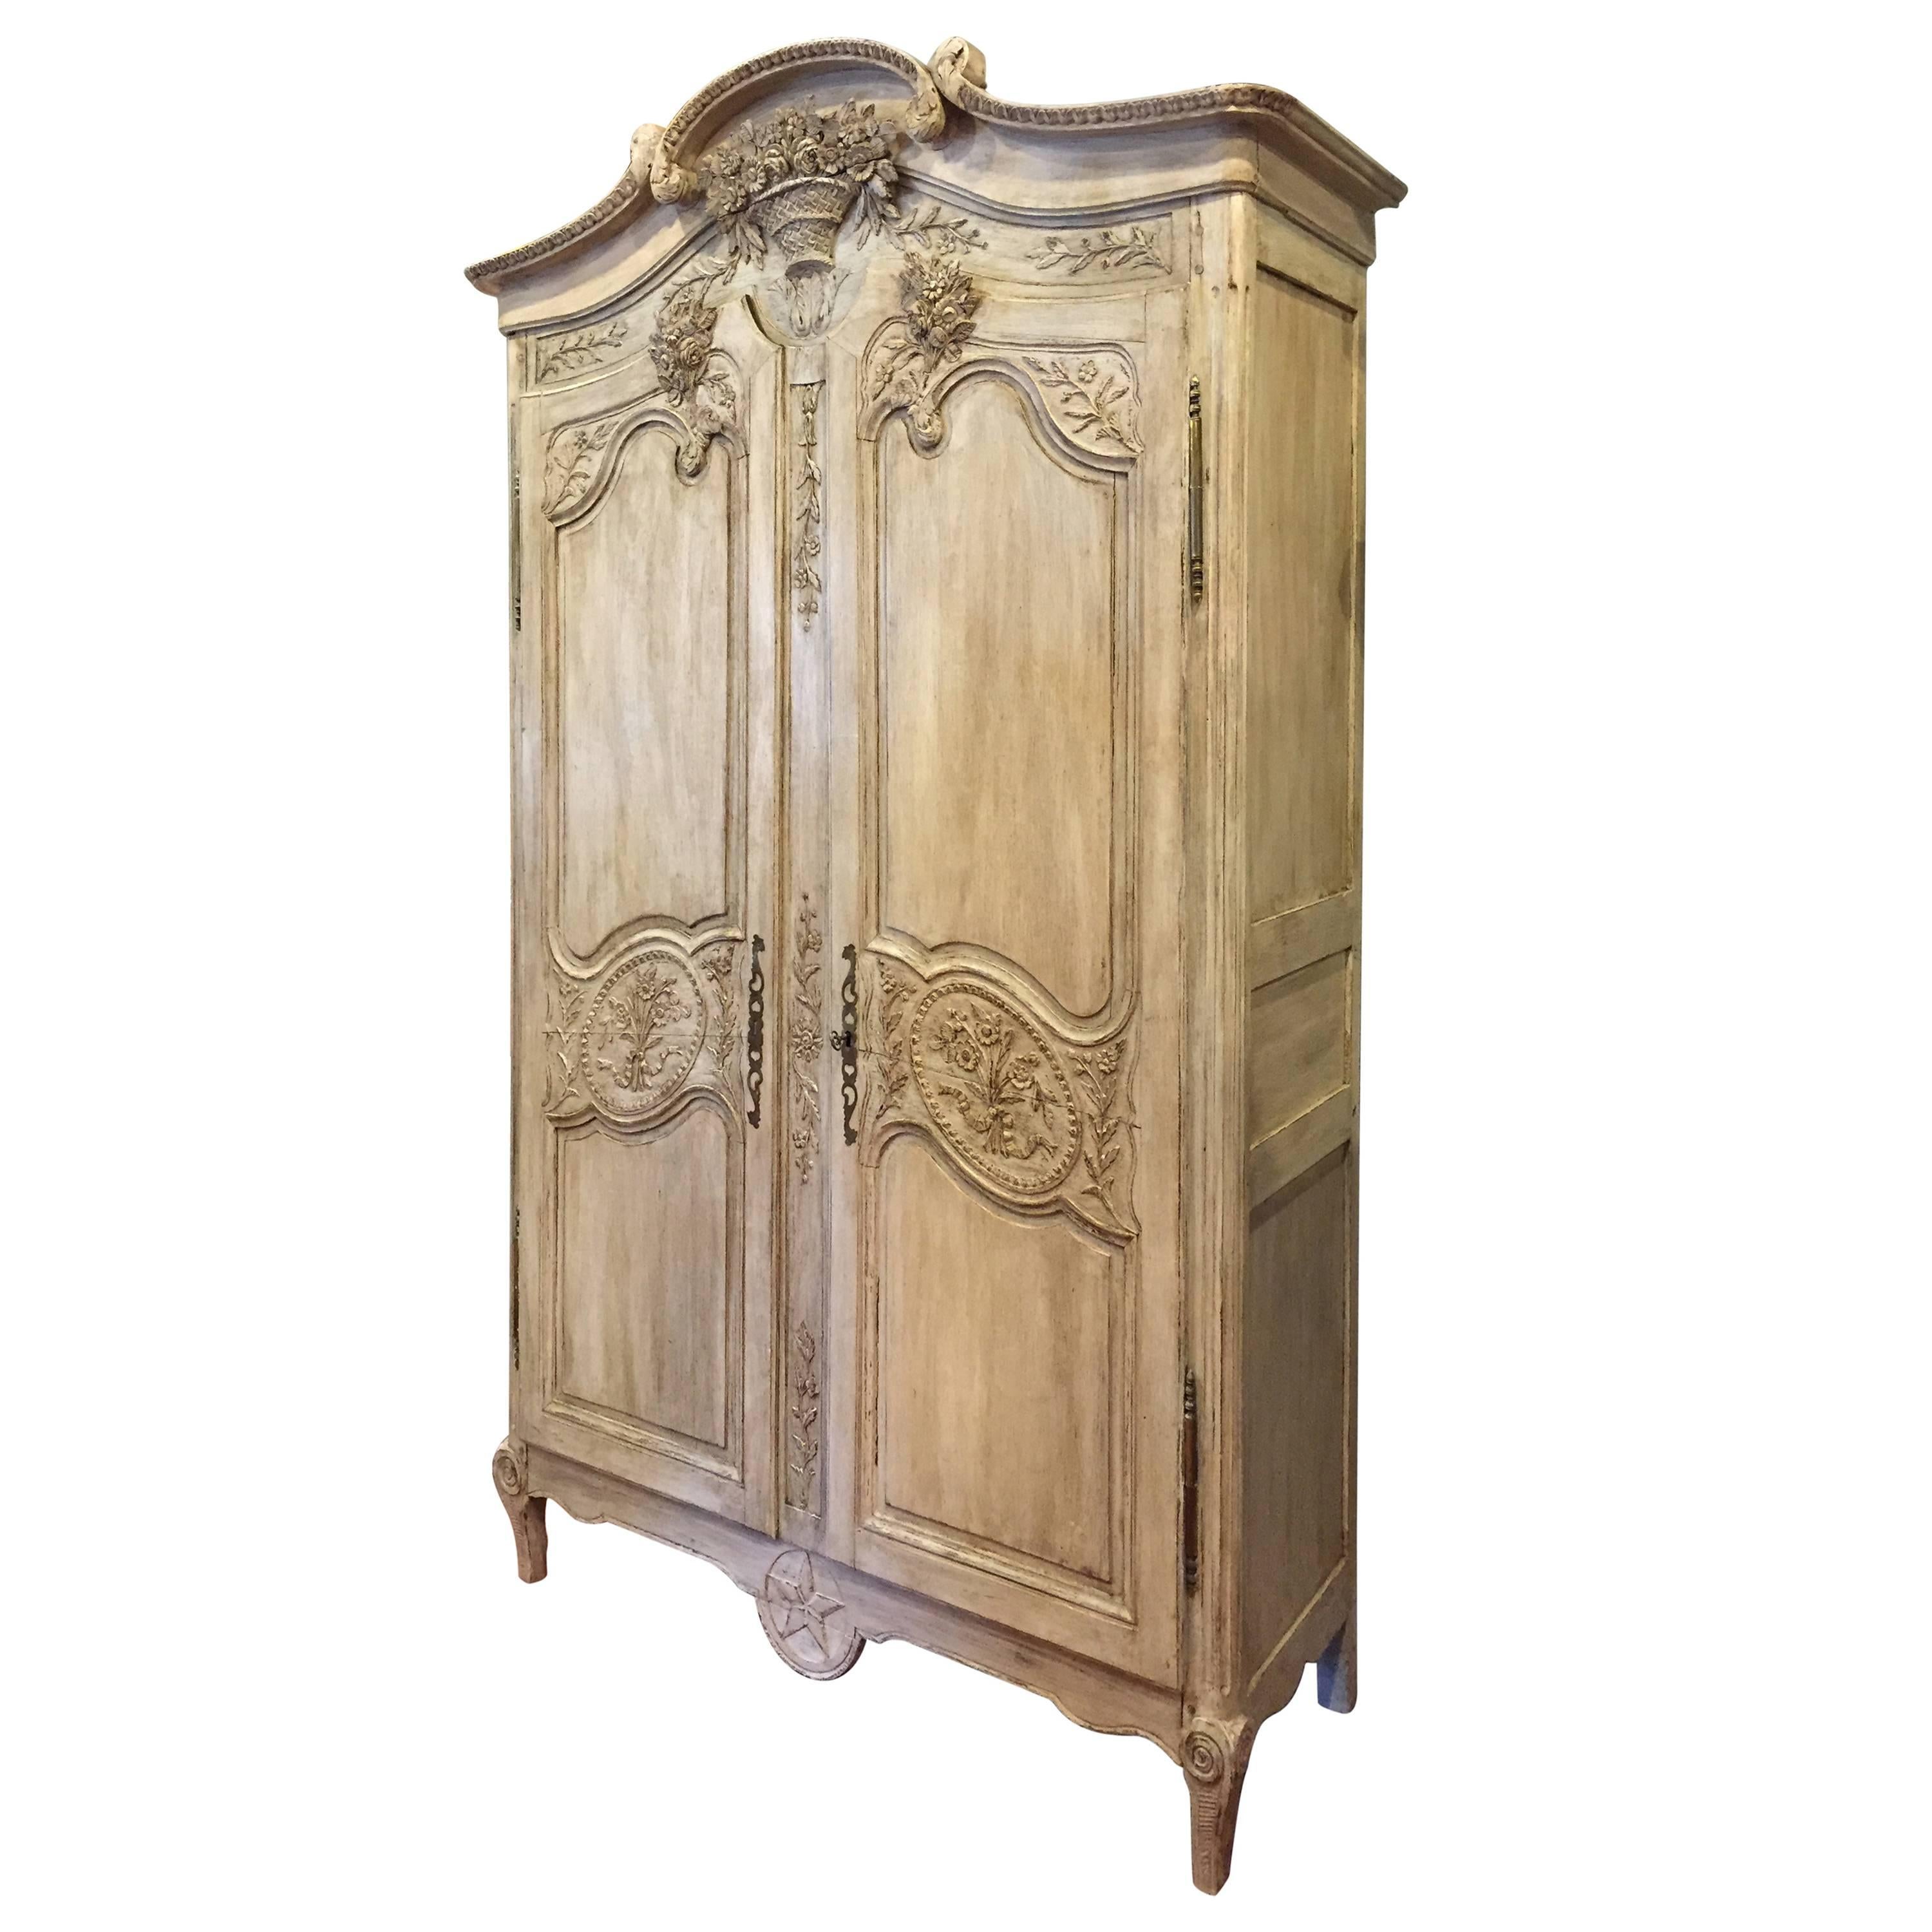 19th Century French Painted Armoire